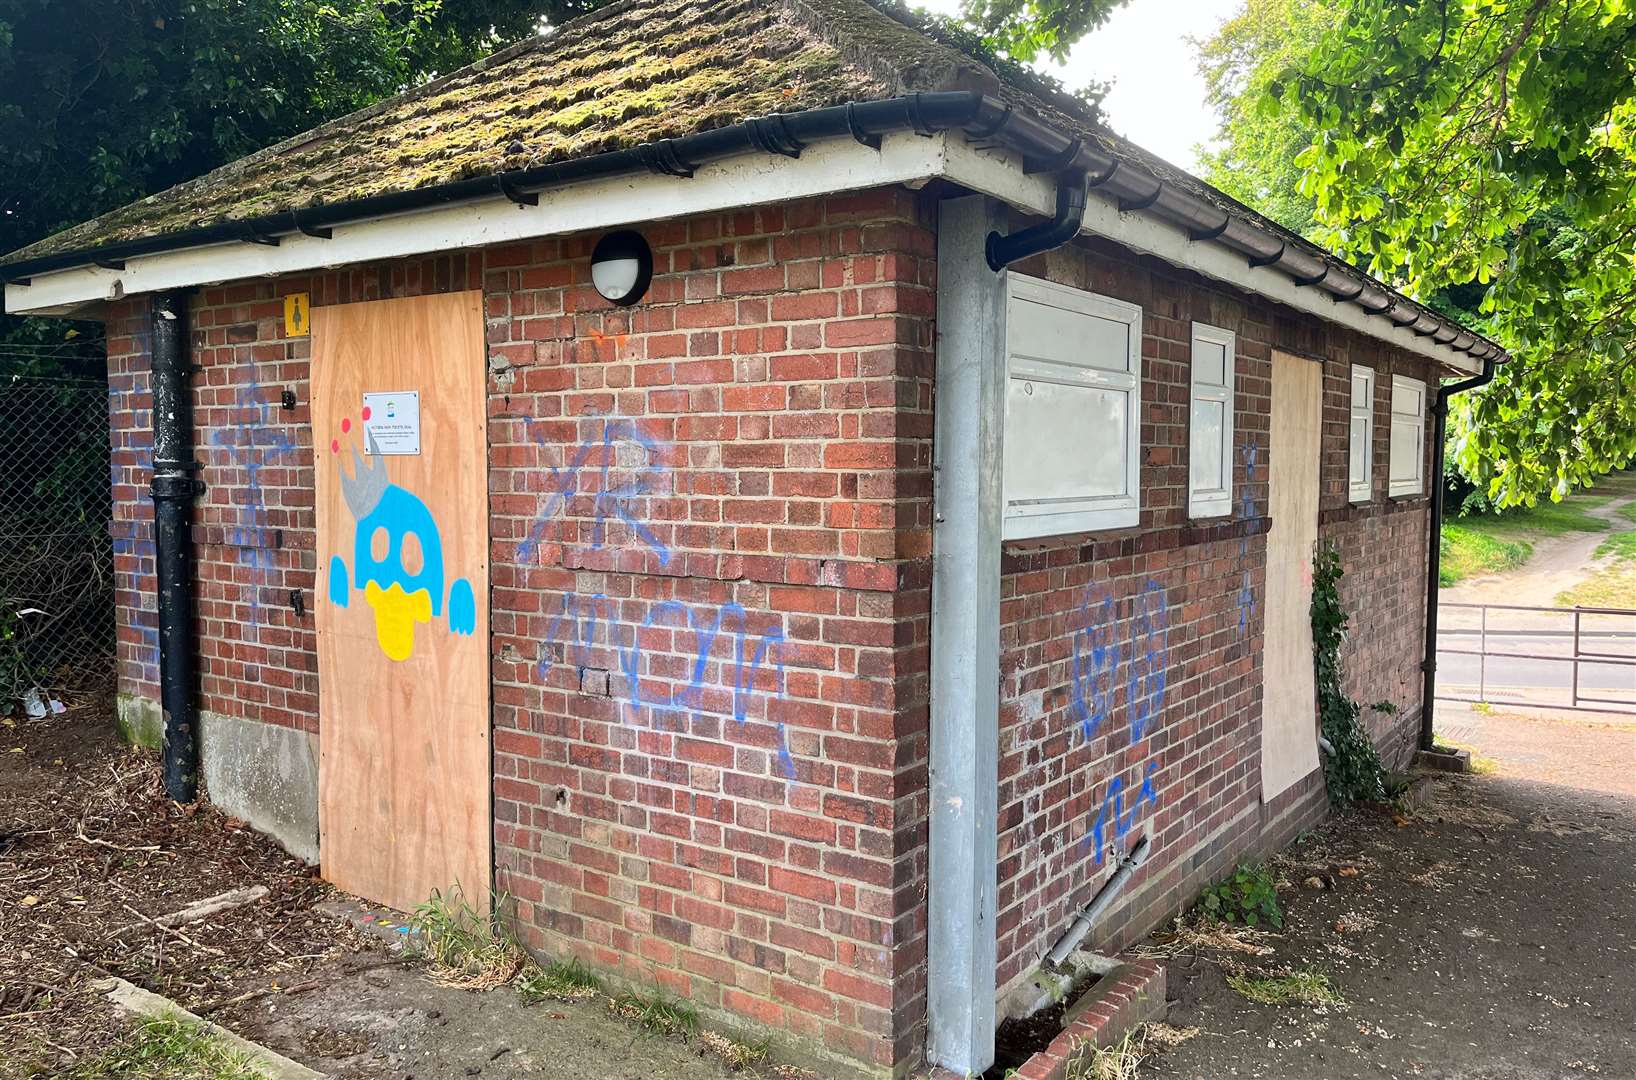 The loos in Victoria Park were shut following a spate of vandalism